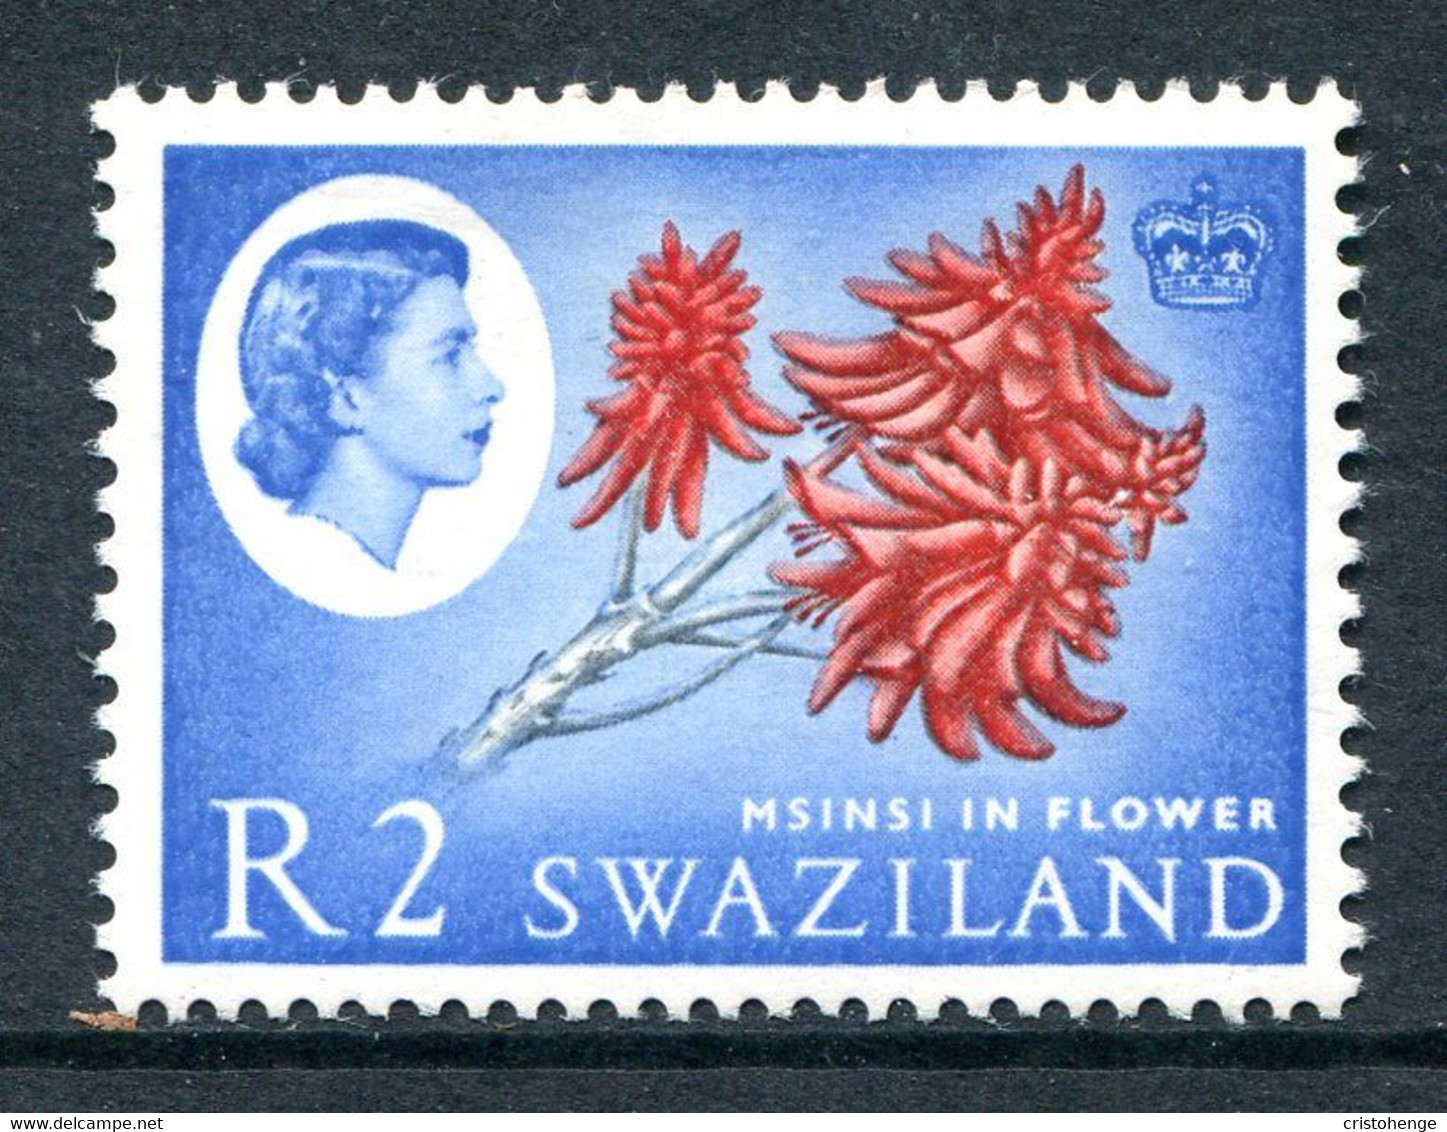 Swaziland 1962-66 Pictorials - 2r Msinsi In Flower HM (SG 105) - Swaziland (...-1967)